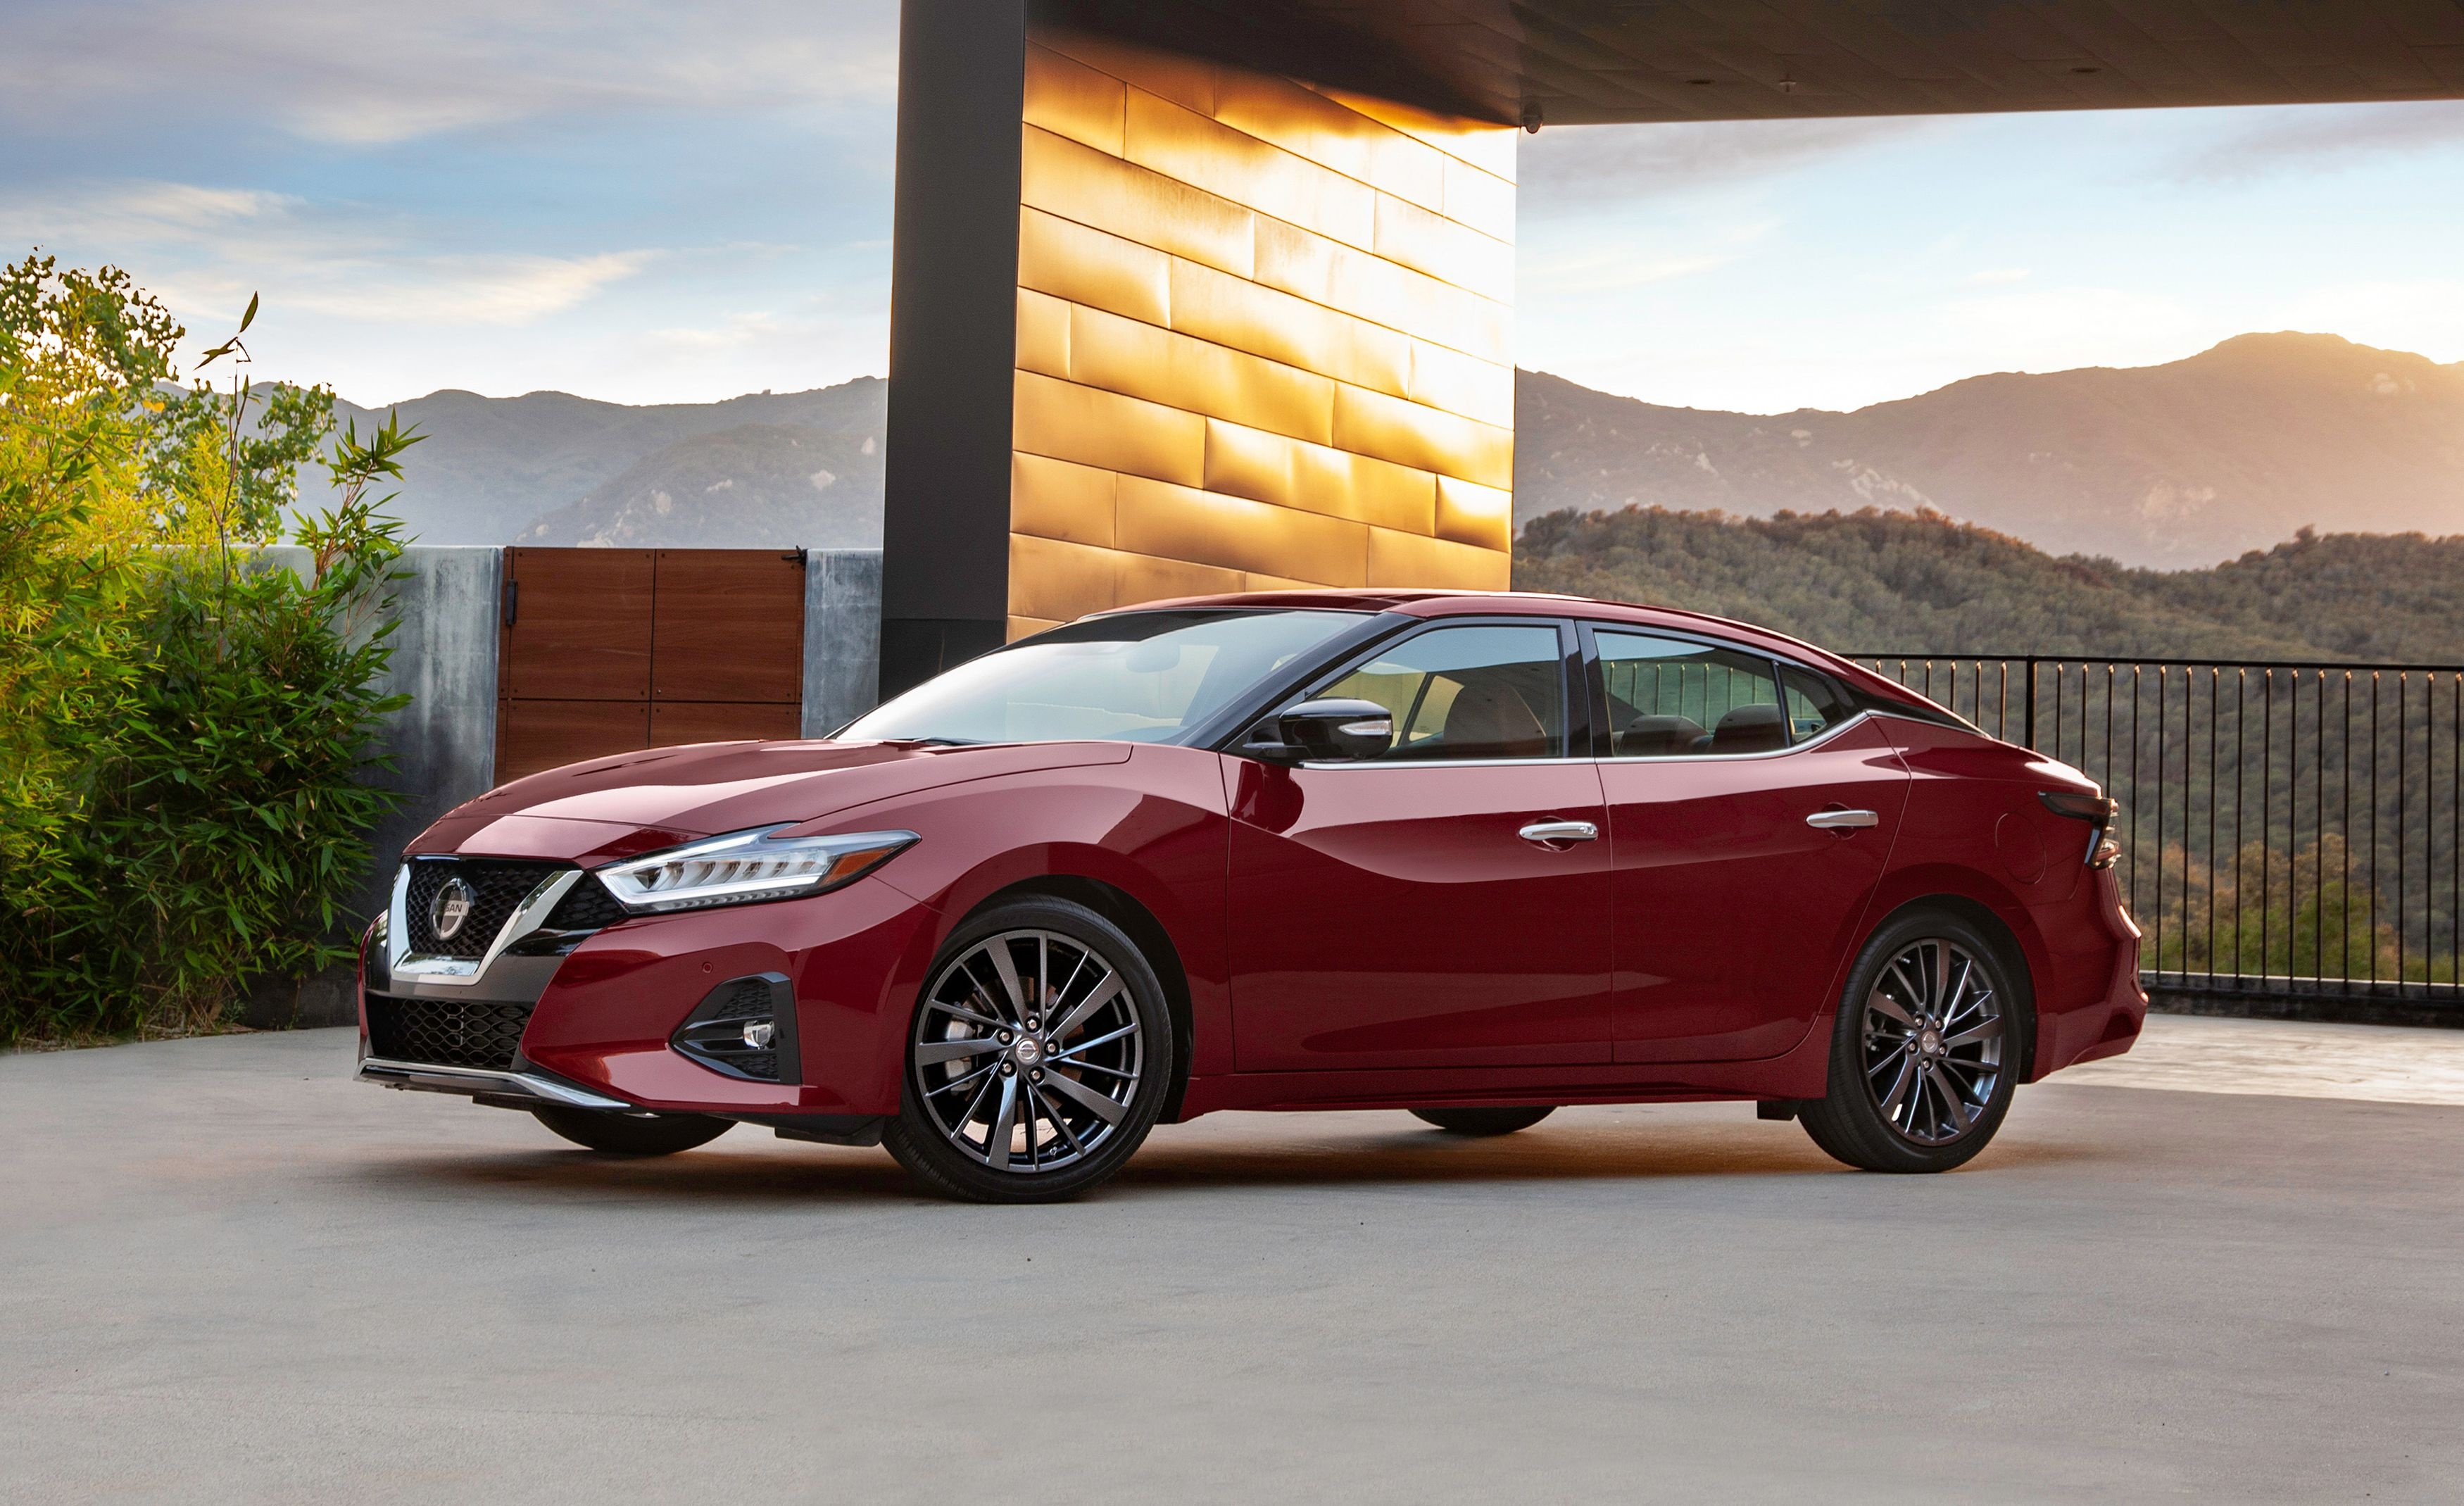 Nissan Maxima, 2019 model, Safety features, Freshened look, 3500x2140 HD Desktop